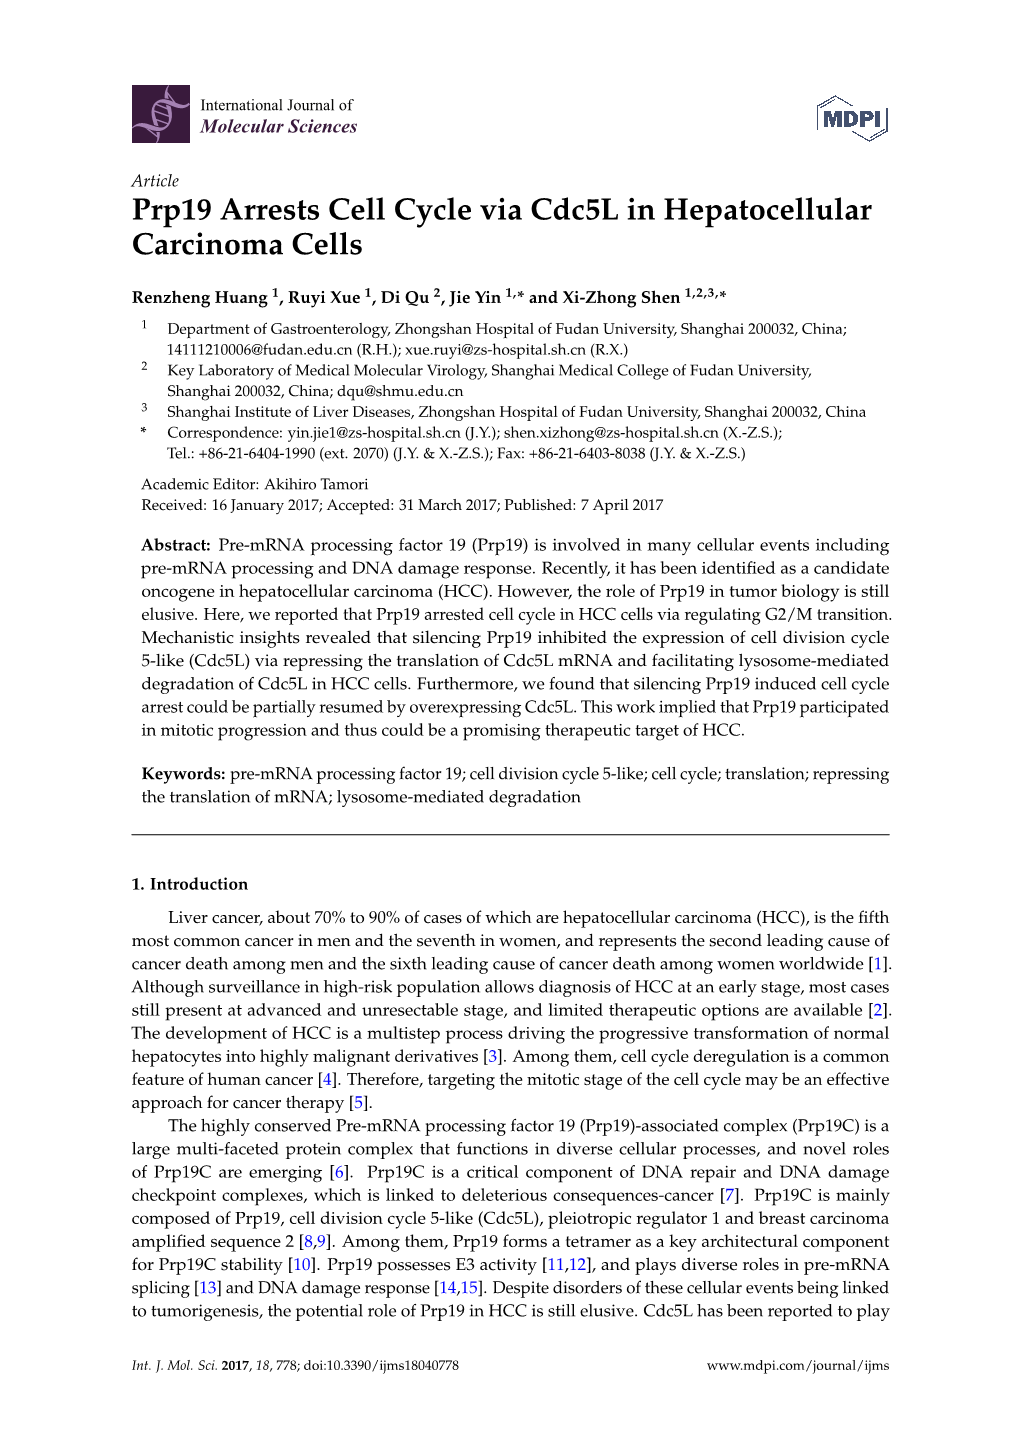 Prp19 Arrests Cell Cycle Via Cdc5l in Hepatocellular Carcinoma Cells